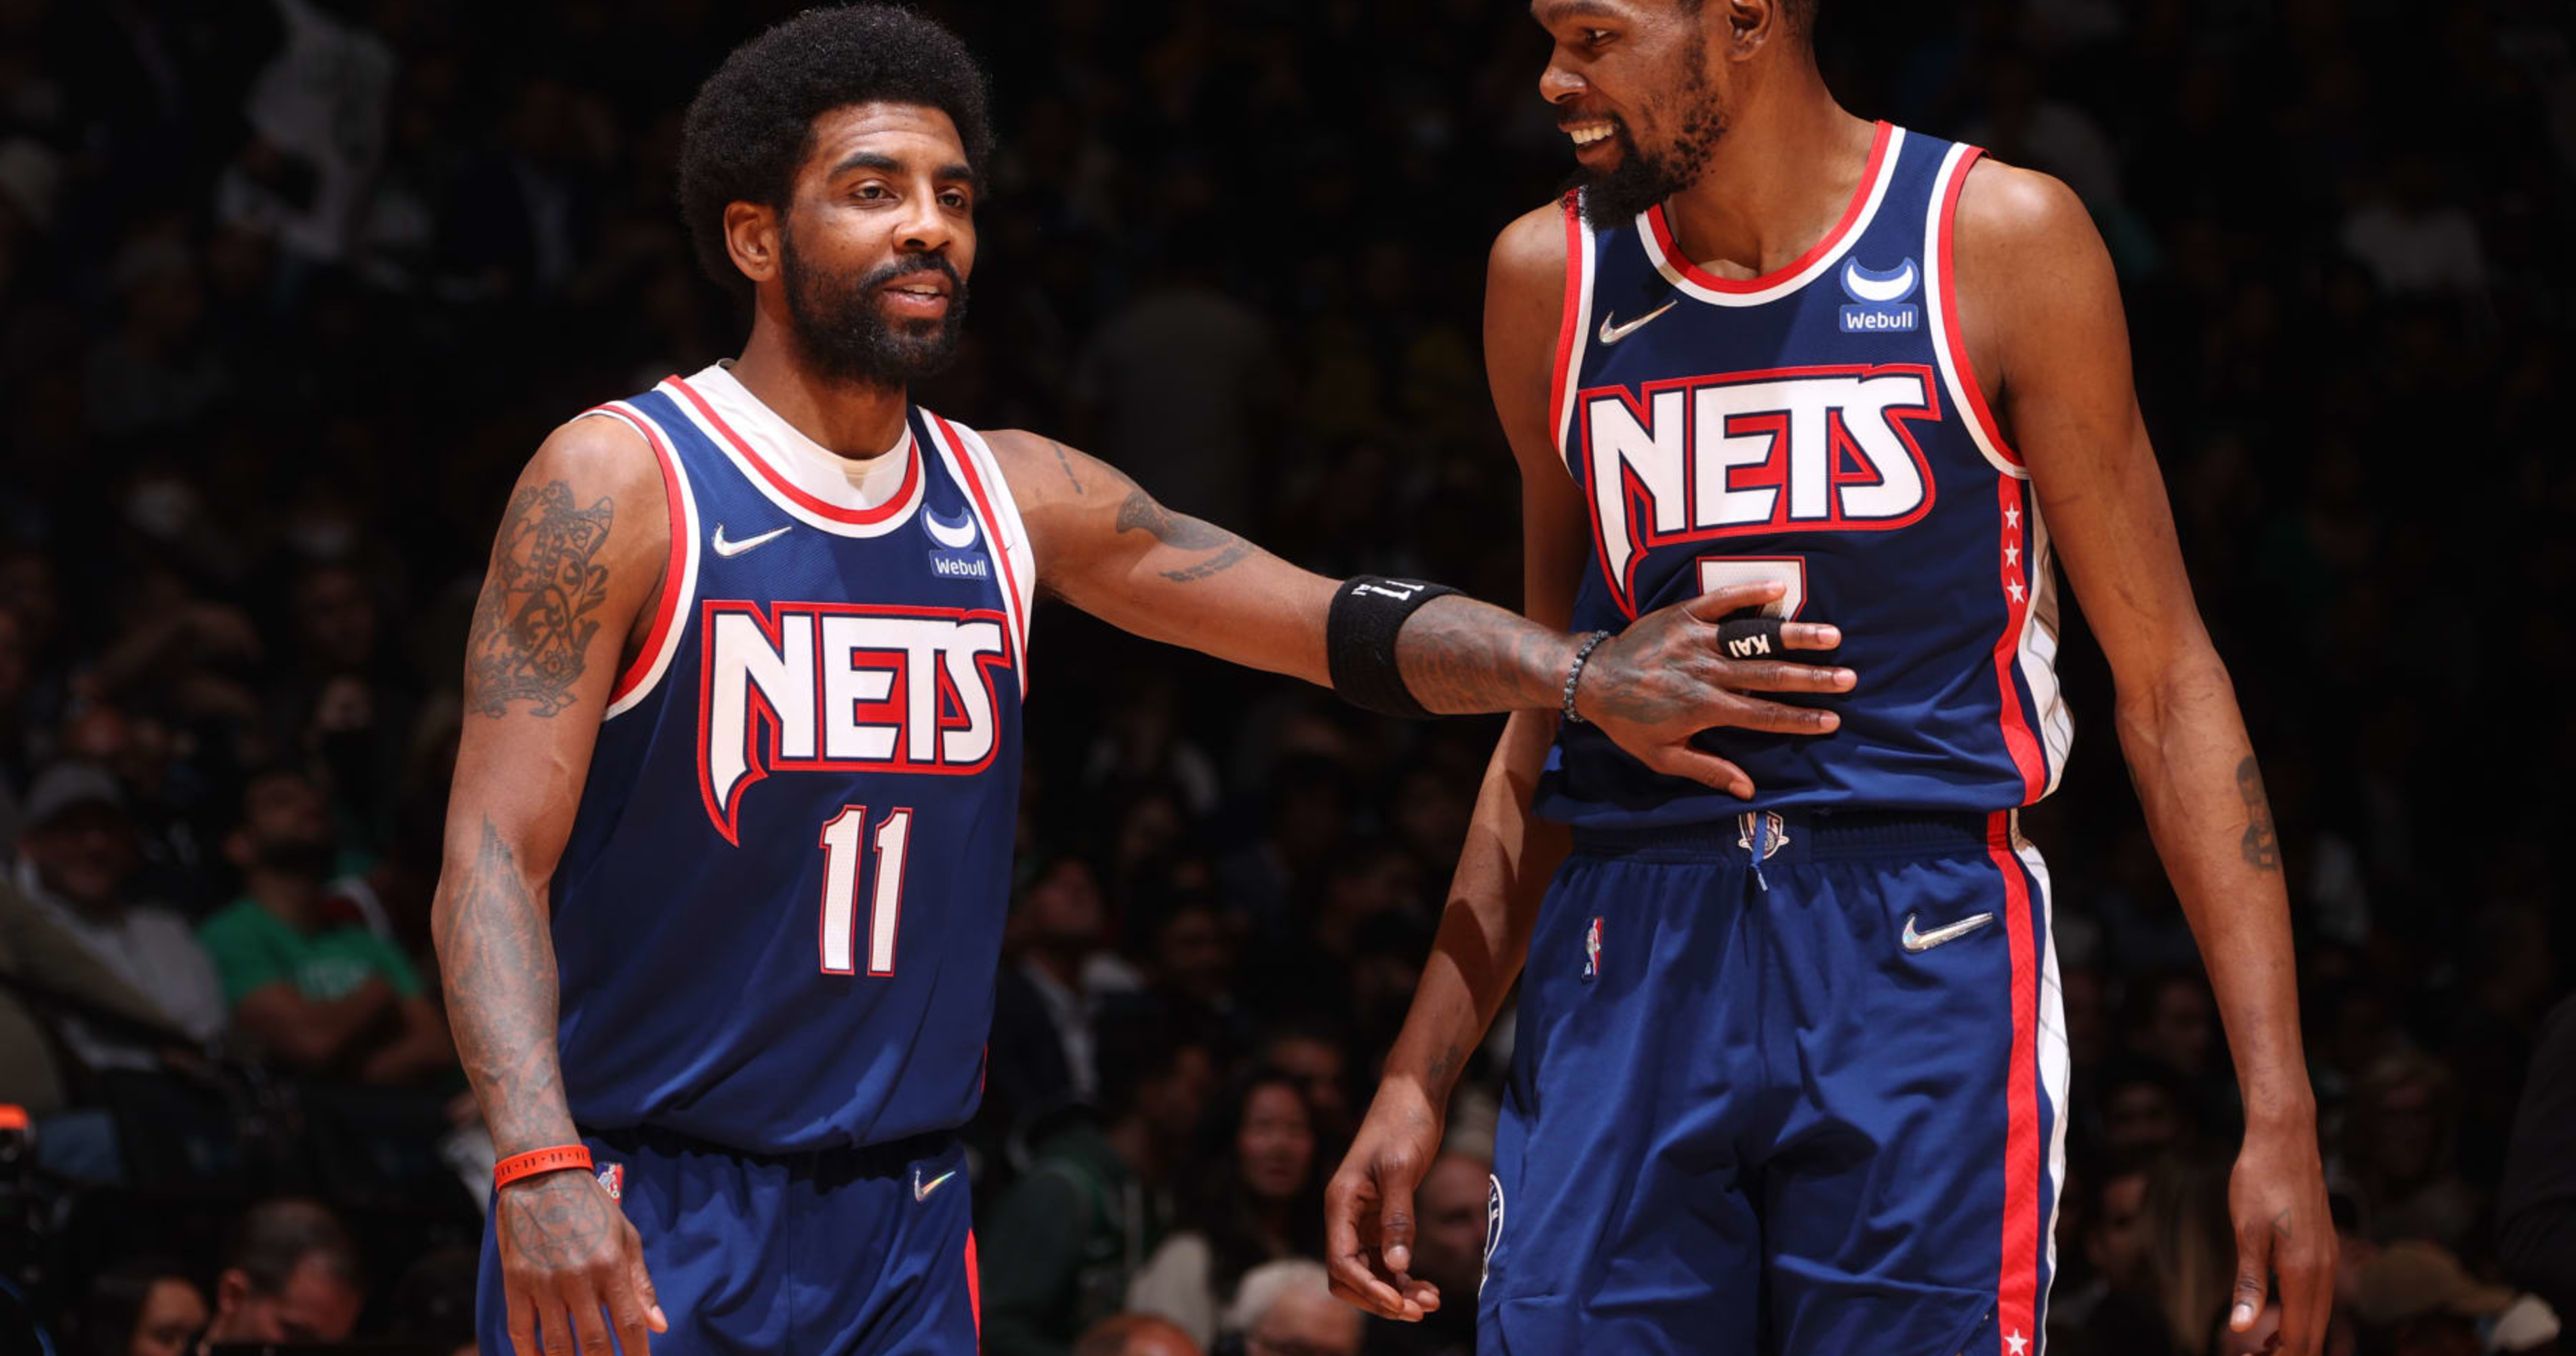 Nets Rumors: Kevin Durant, Kyrie Irving Have Communicated 'on a Regular Basis'